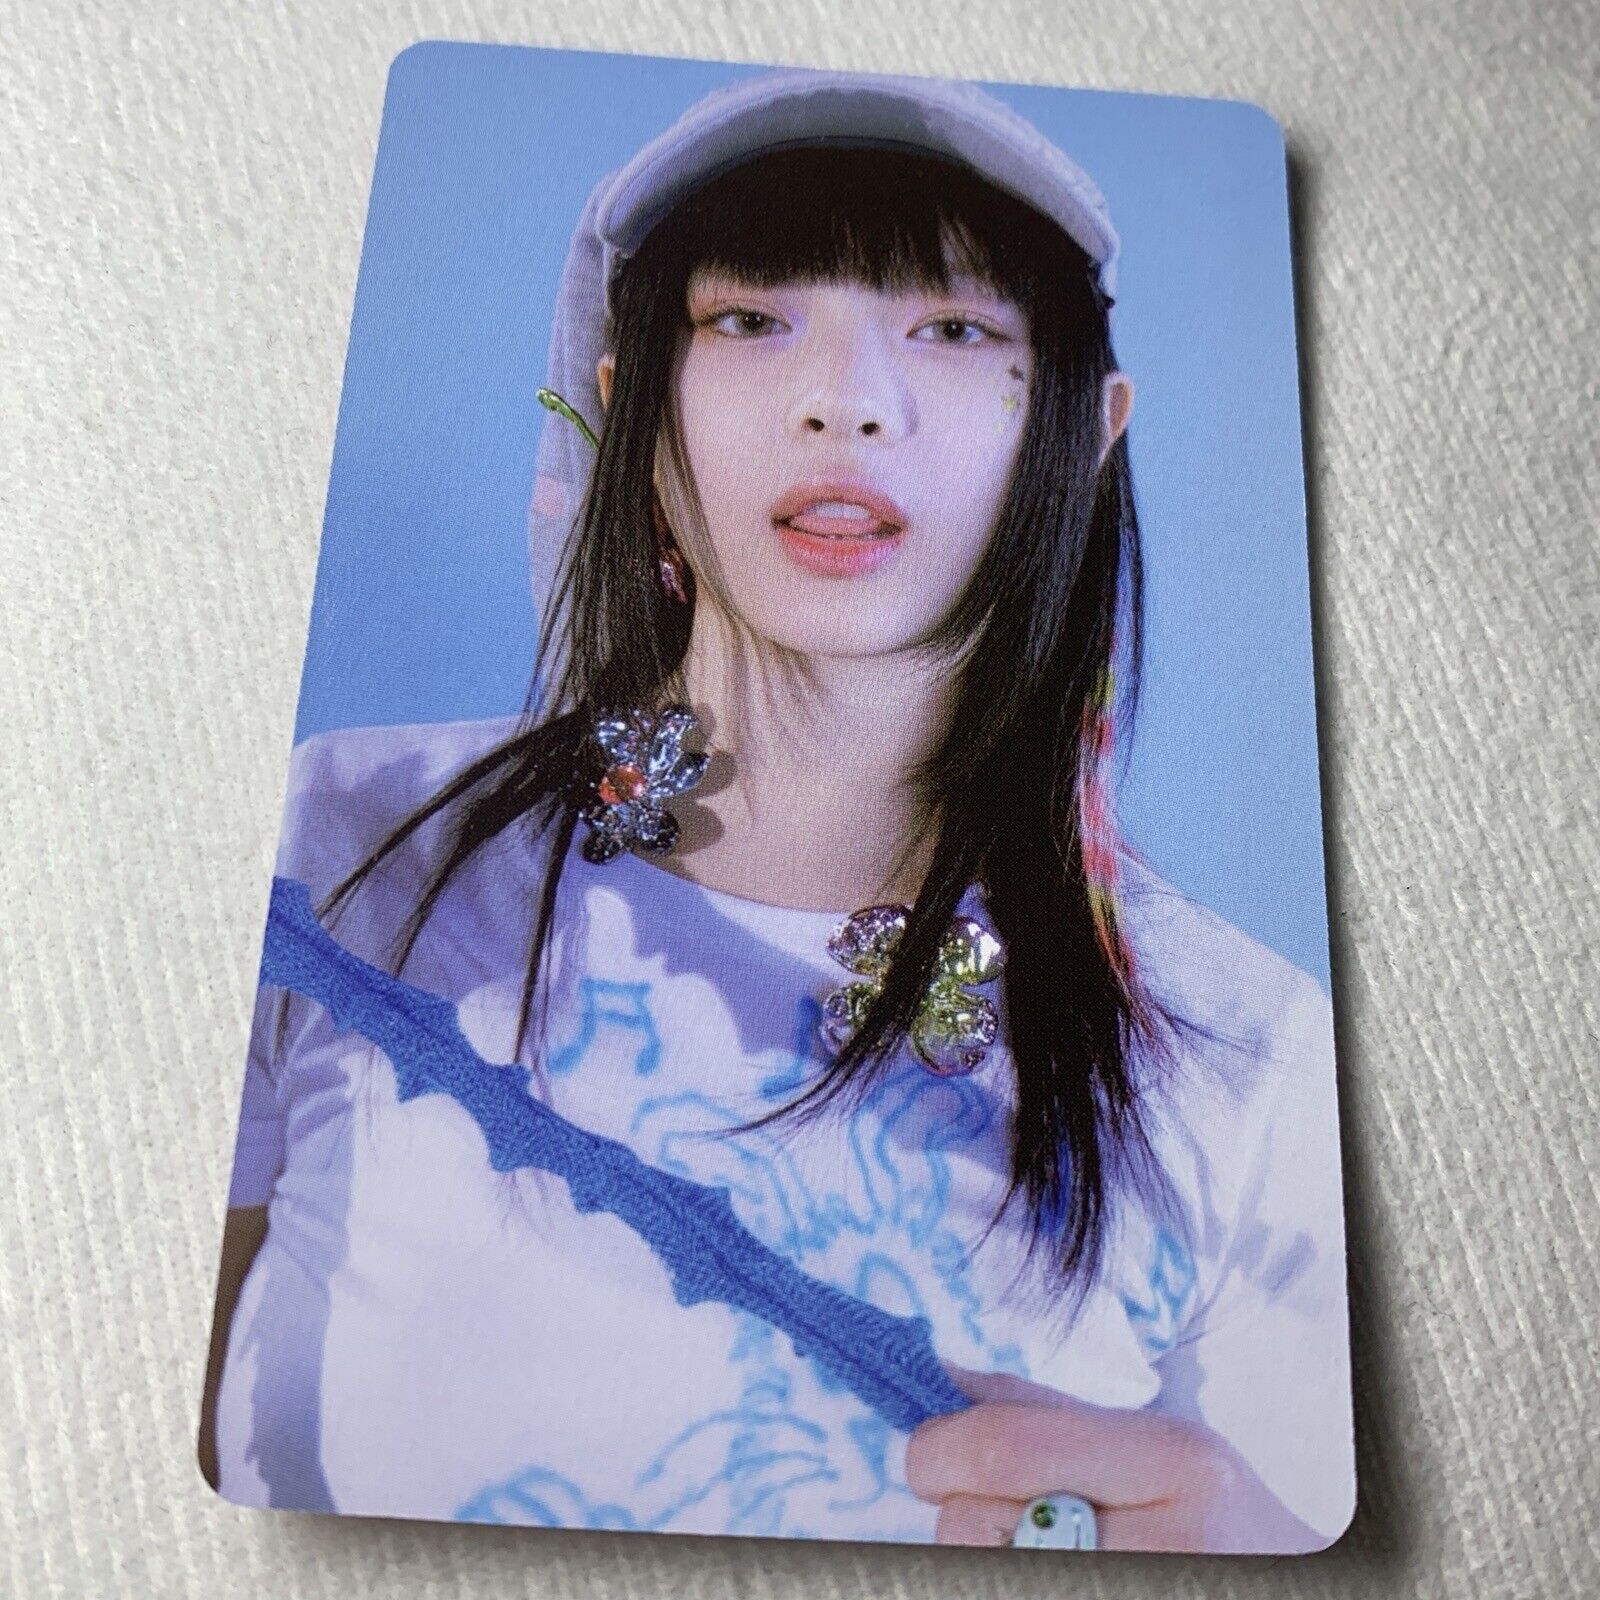 Hanni NEWJEANS OMG Celeb Photo And Daily Life Photo Edition Photocard Hat 2